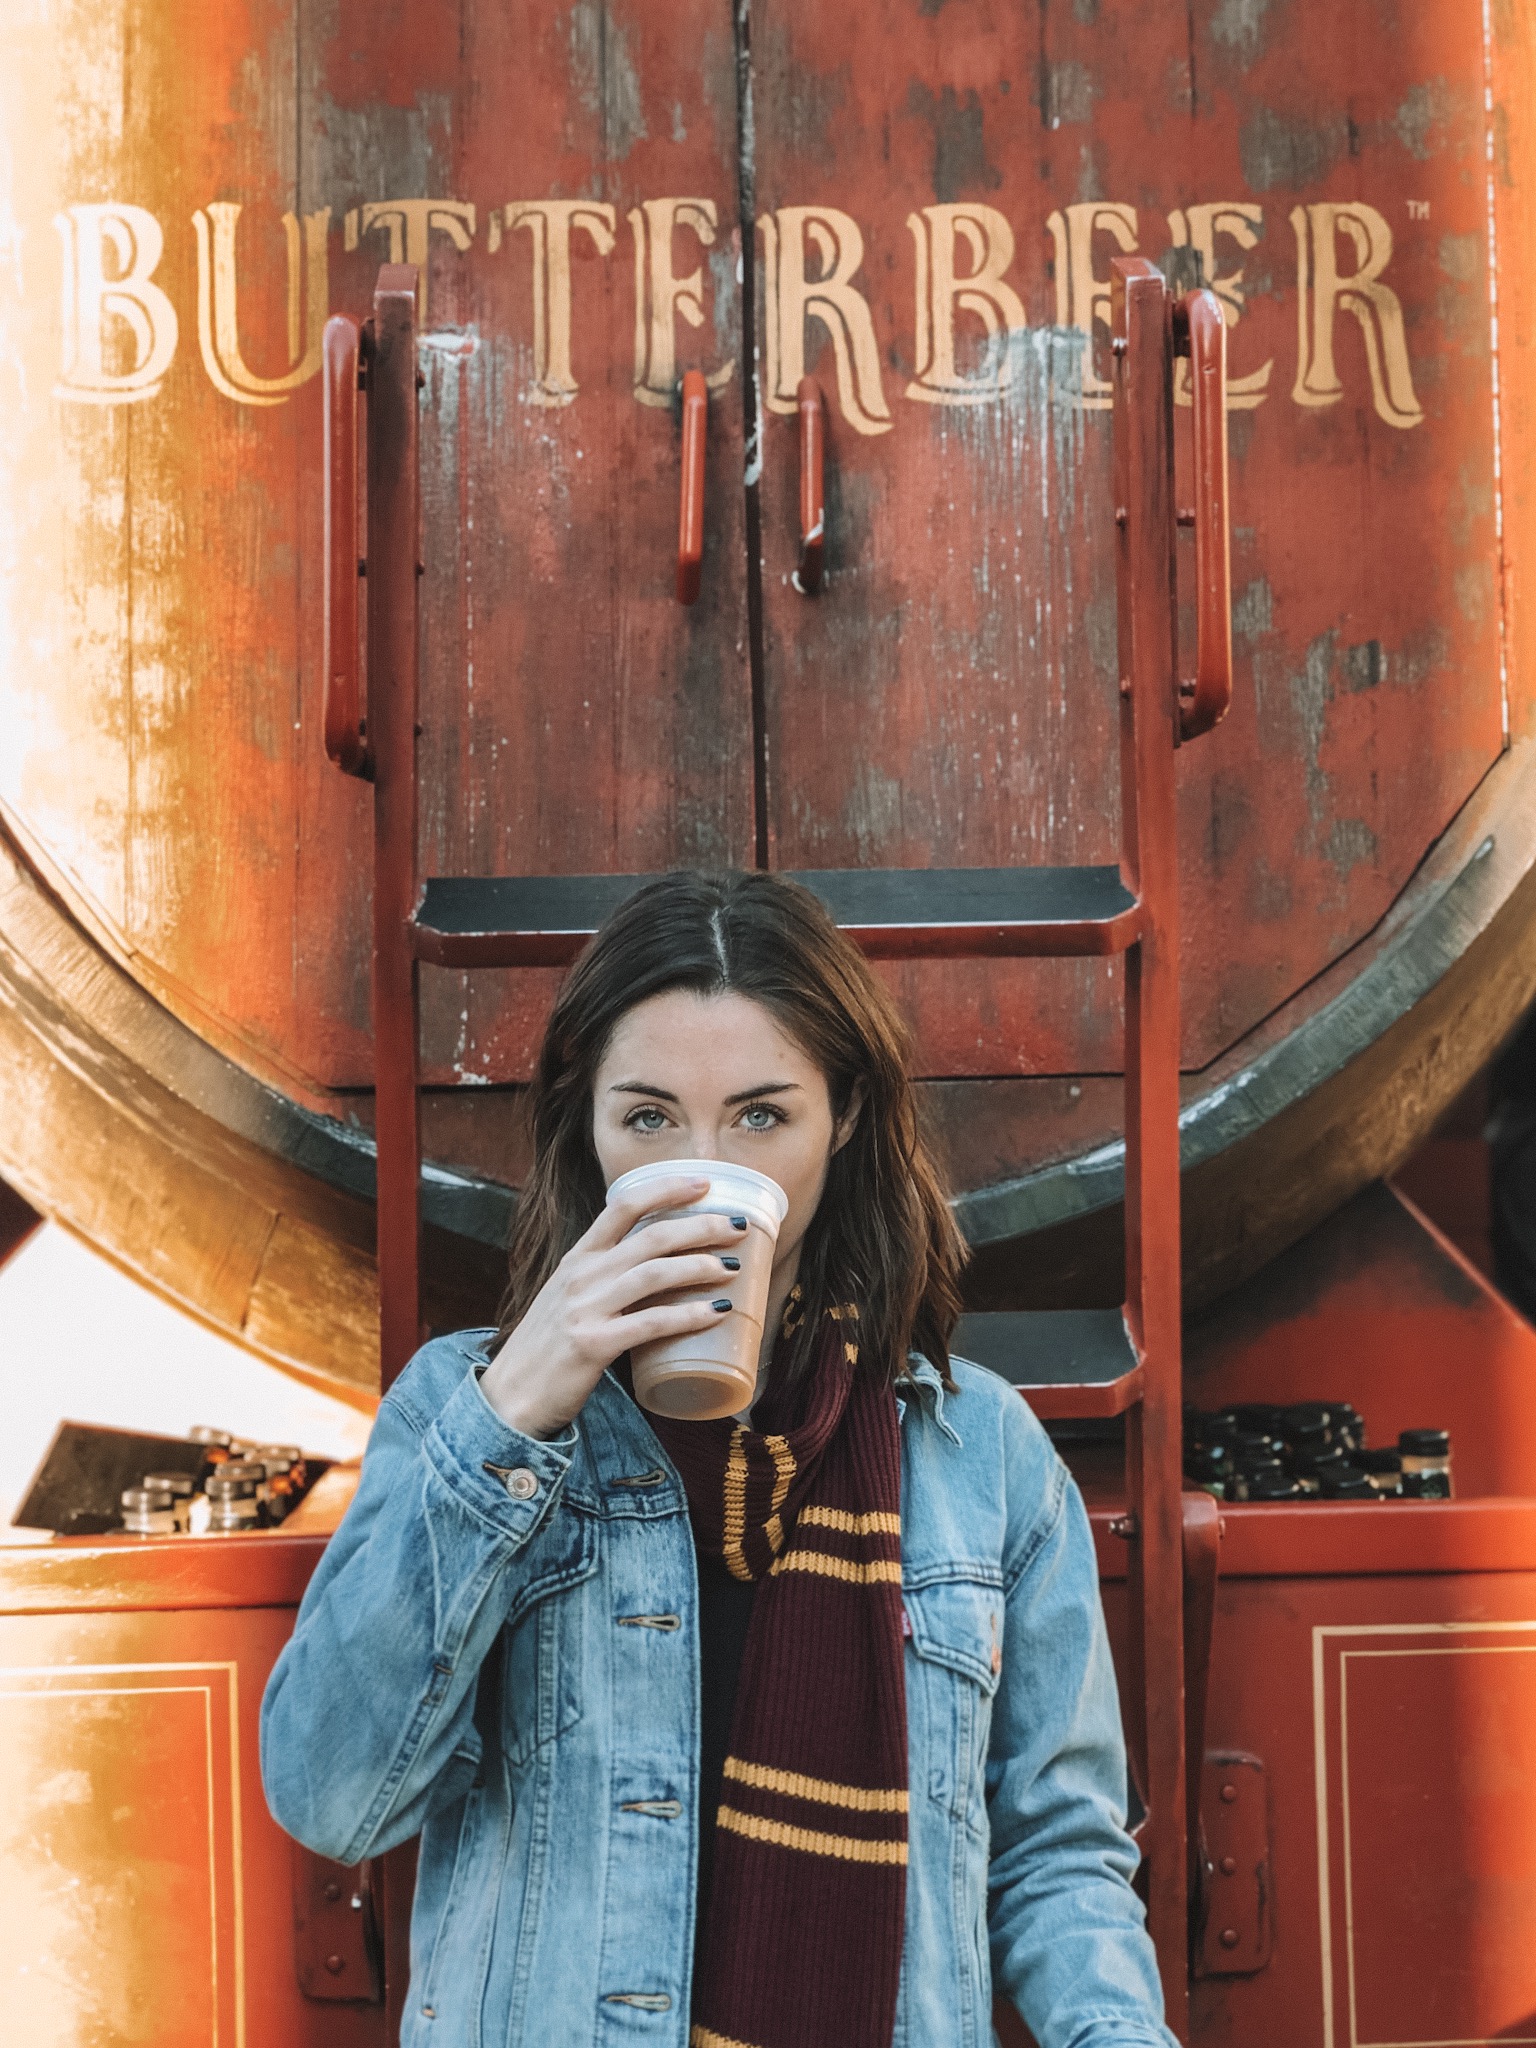 Drink a Butterbeer following a complete itinerary to Hogsmeade Village